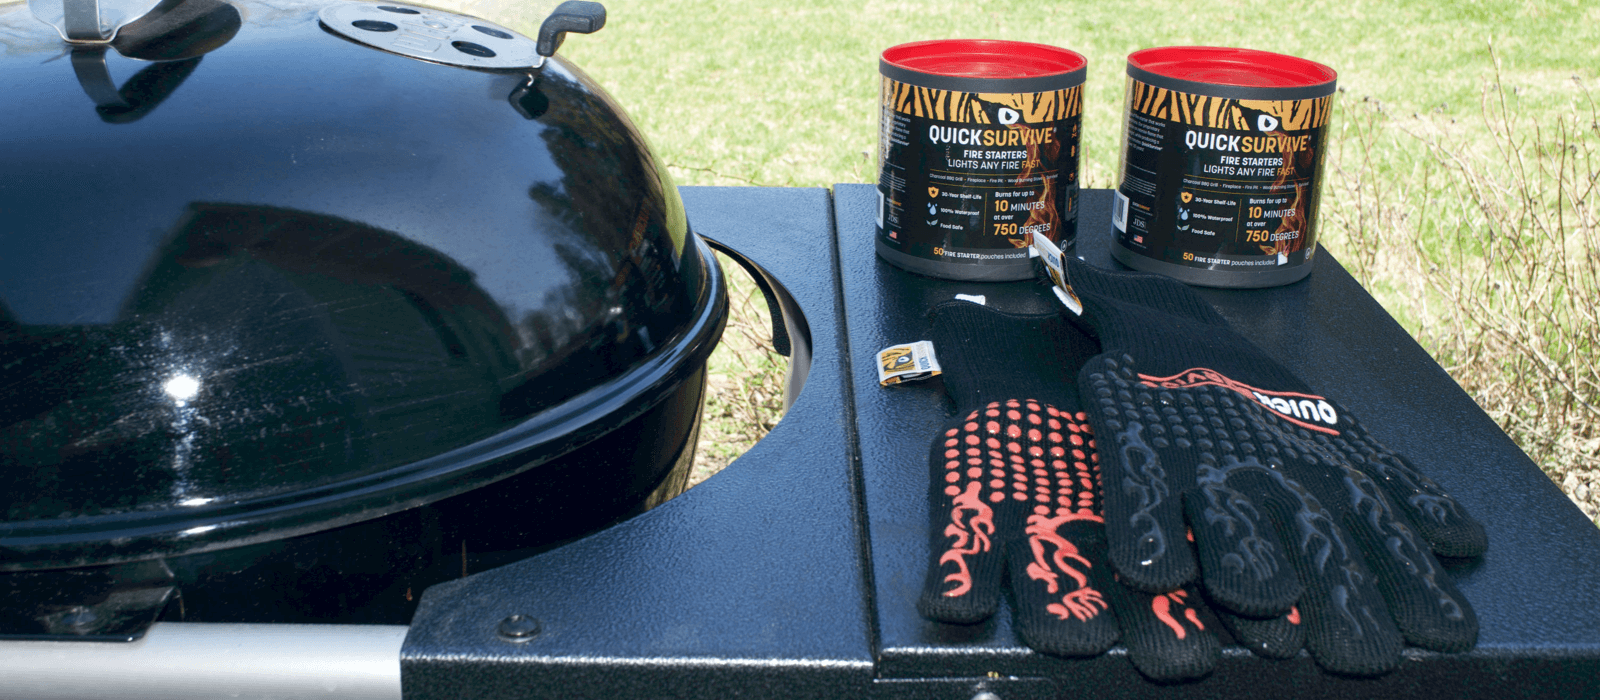 Grill Master Bundle the best fire starters bundle for grilling, BBQing and Smoking for getting charcoal lit fast